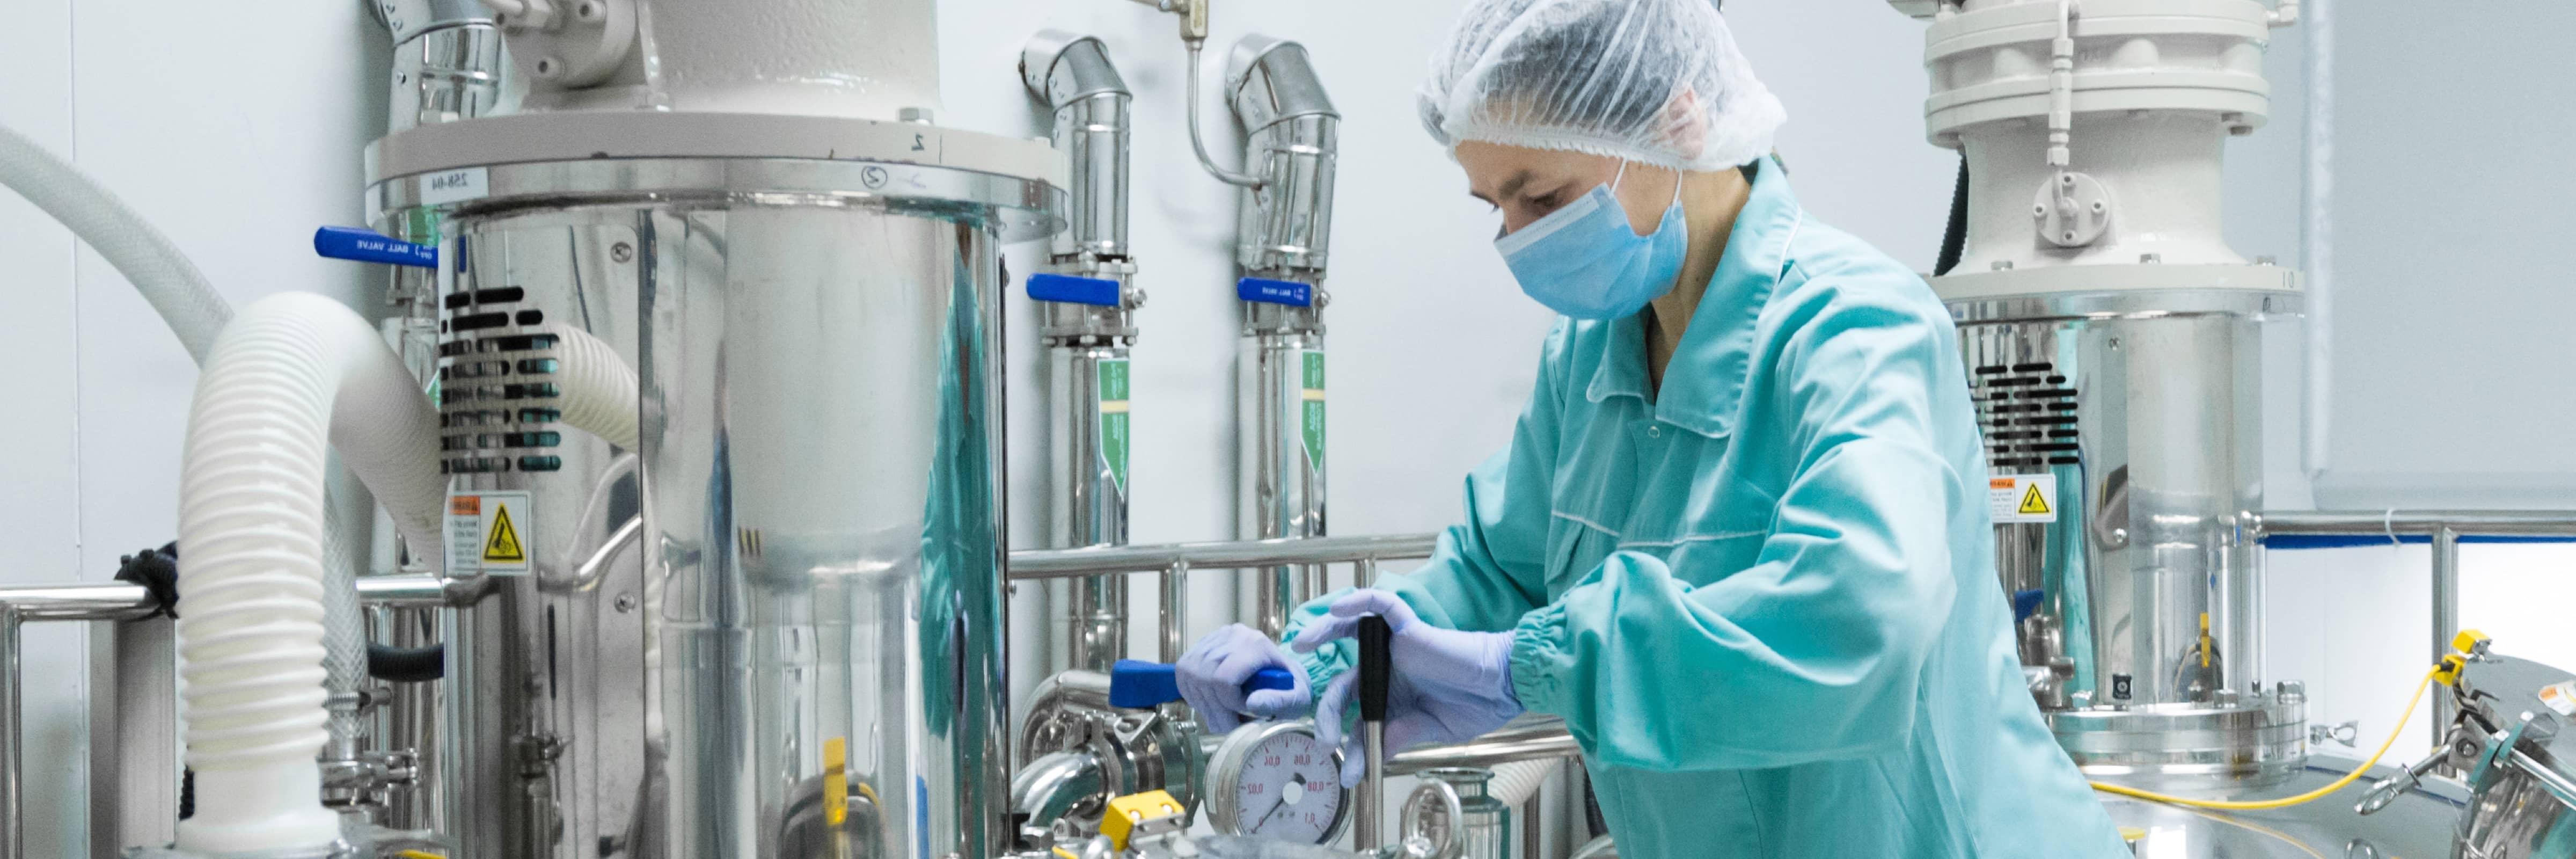 Worker at a pharmaceutical manufacturing facility operating a machine